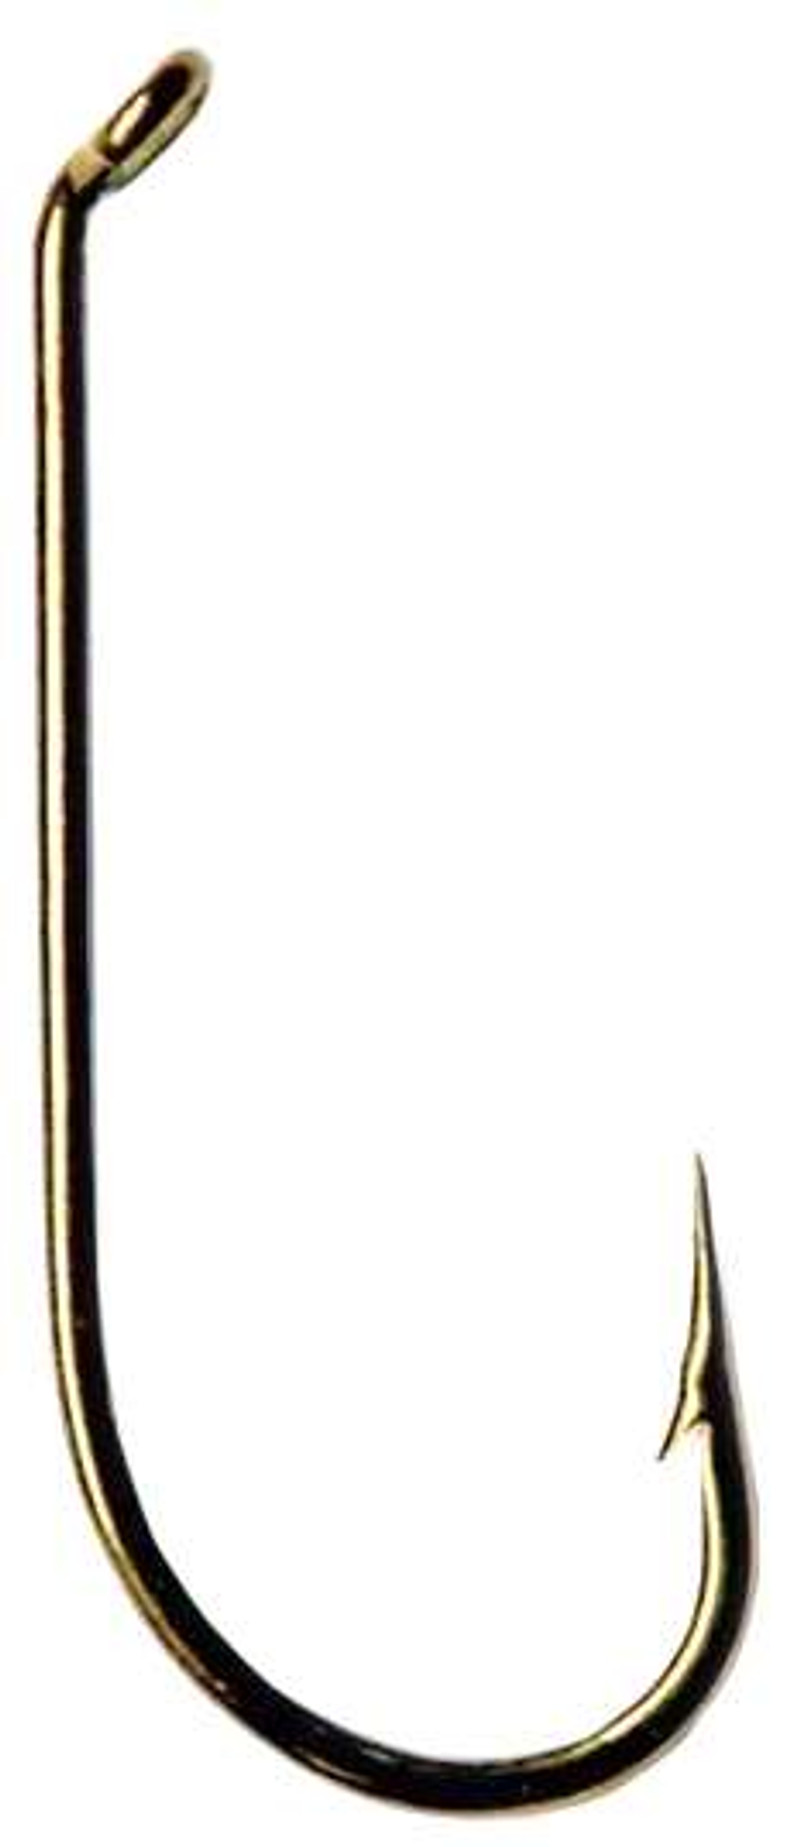  Mustad Dry Fly Hook 94840 Standard Forged Down Eye Fishing  Terminal Tackle (25 Pack), Bronze, Size 12 : Toys & Games